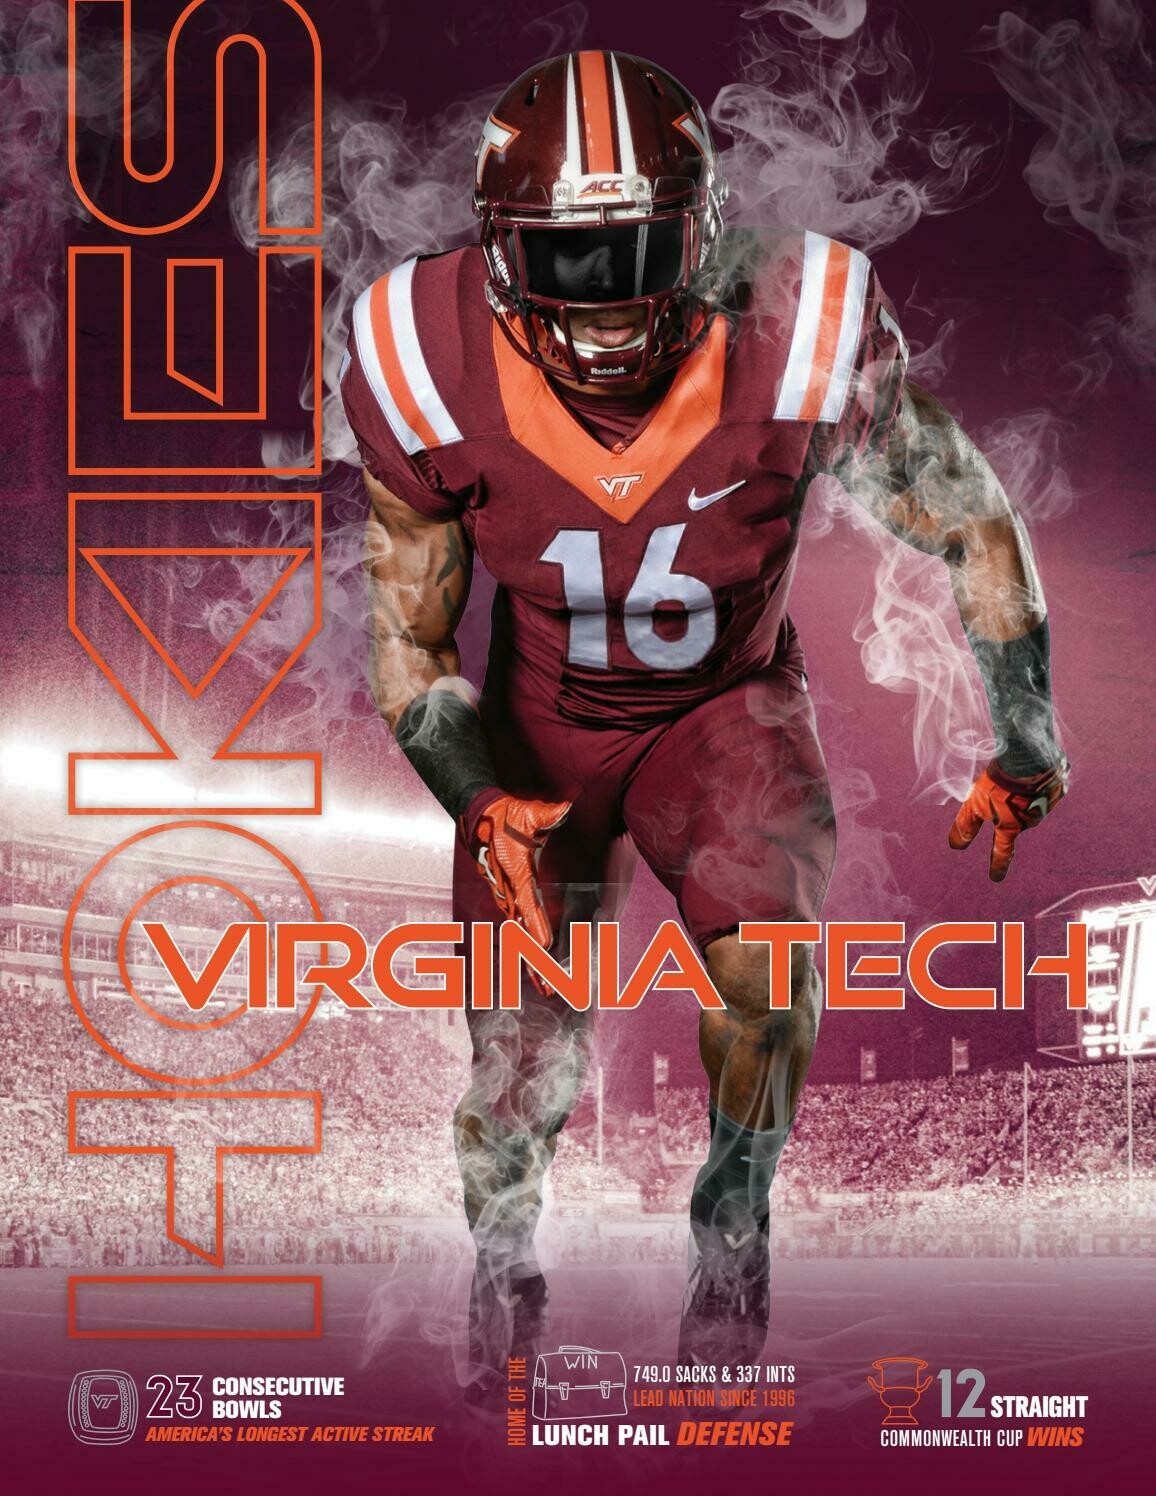 09/21/24 VT vs RUTGERS Ultimate Tailgate Package (INCLUDES PARKING)